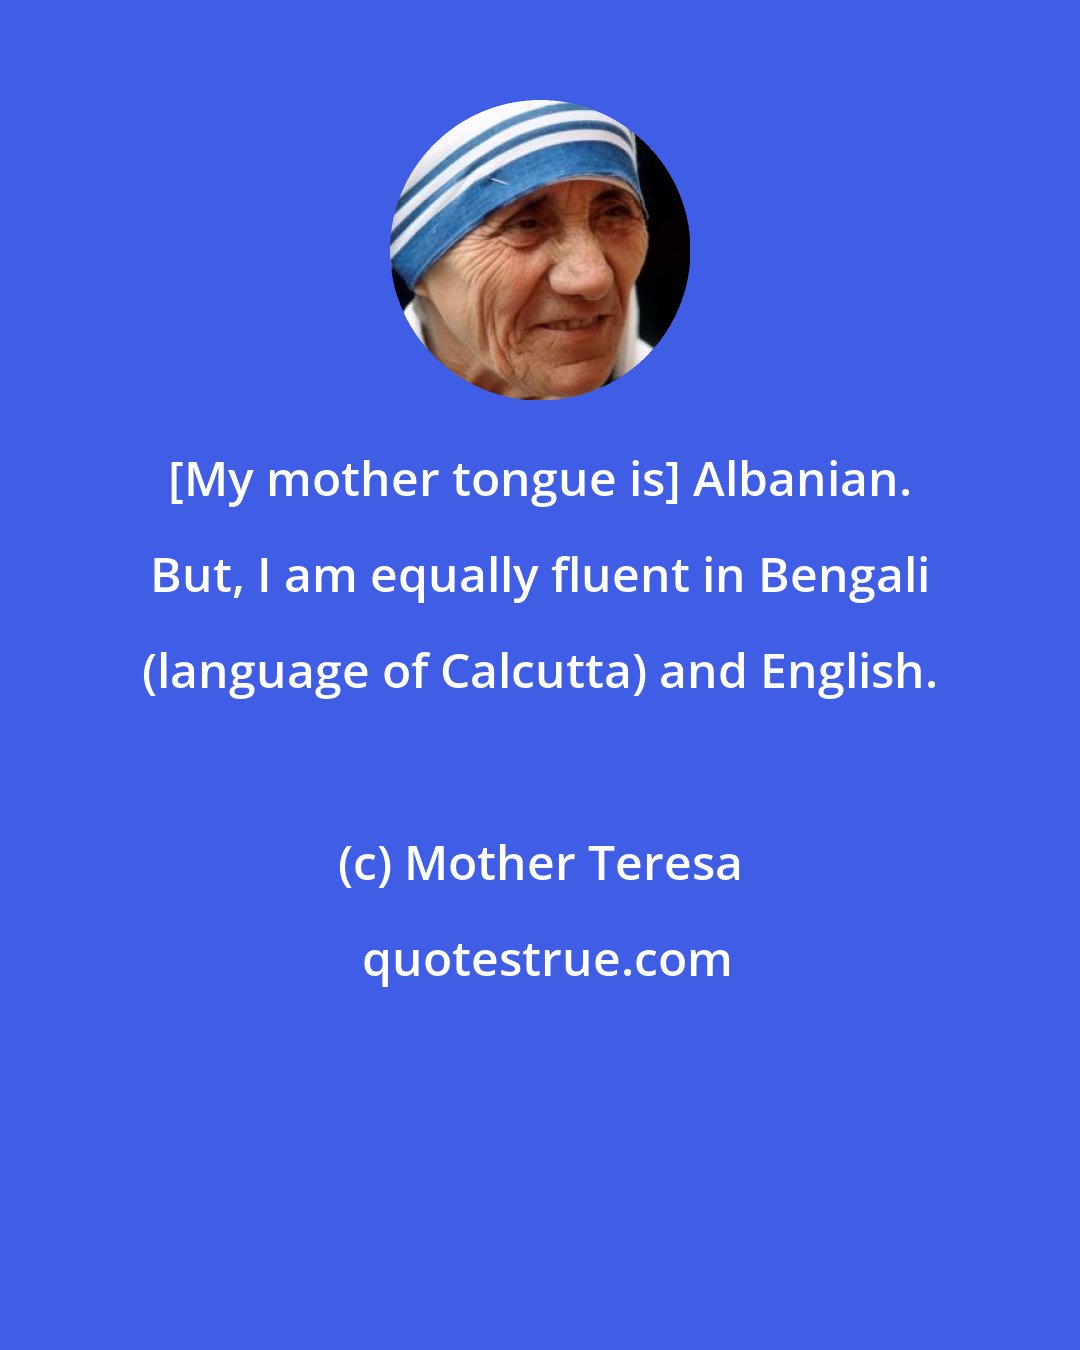 Mother Teresa: [My mother tongue is] Albanian. But, I am equally fluent in Bengali (language of Calcutta) and English.